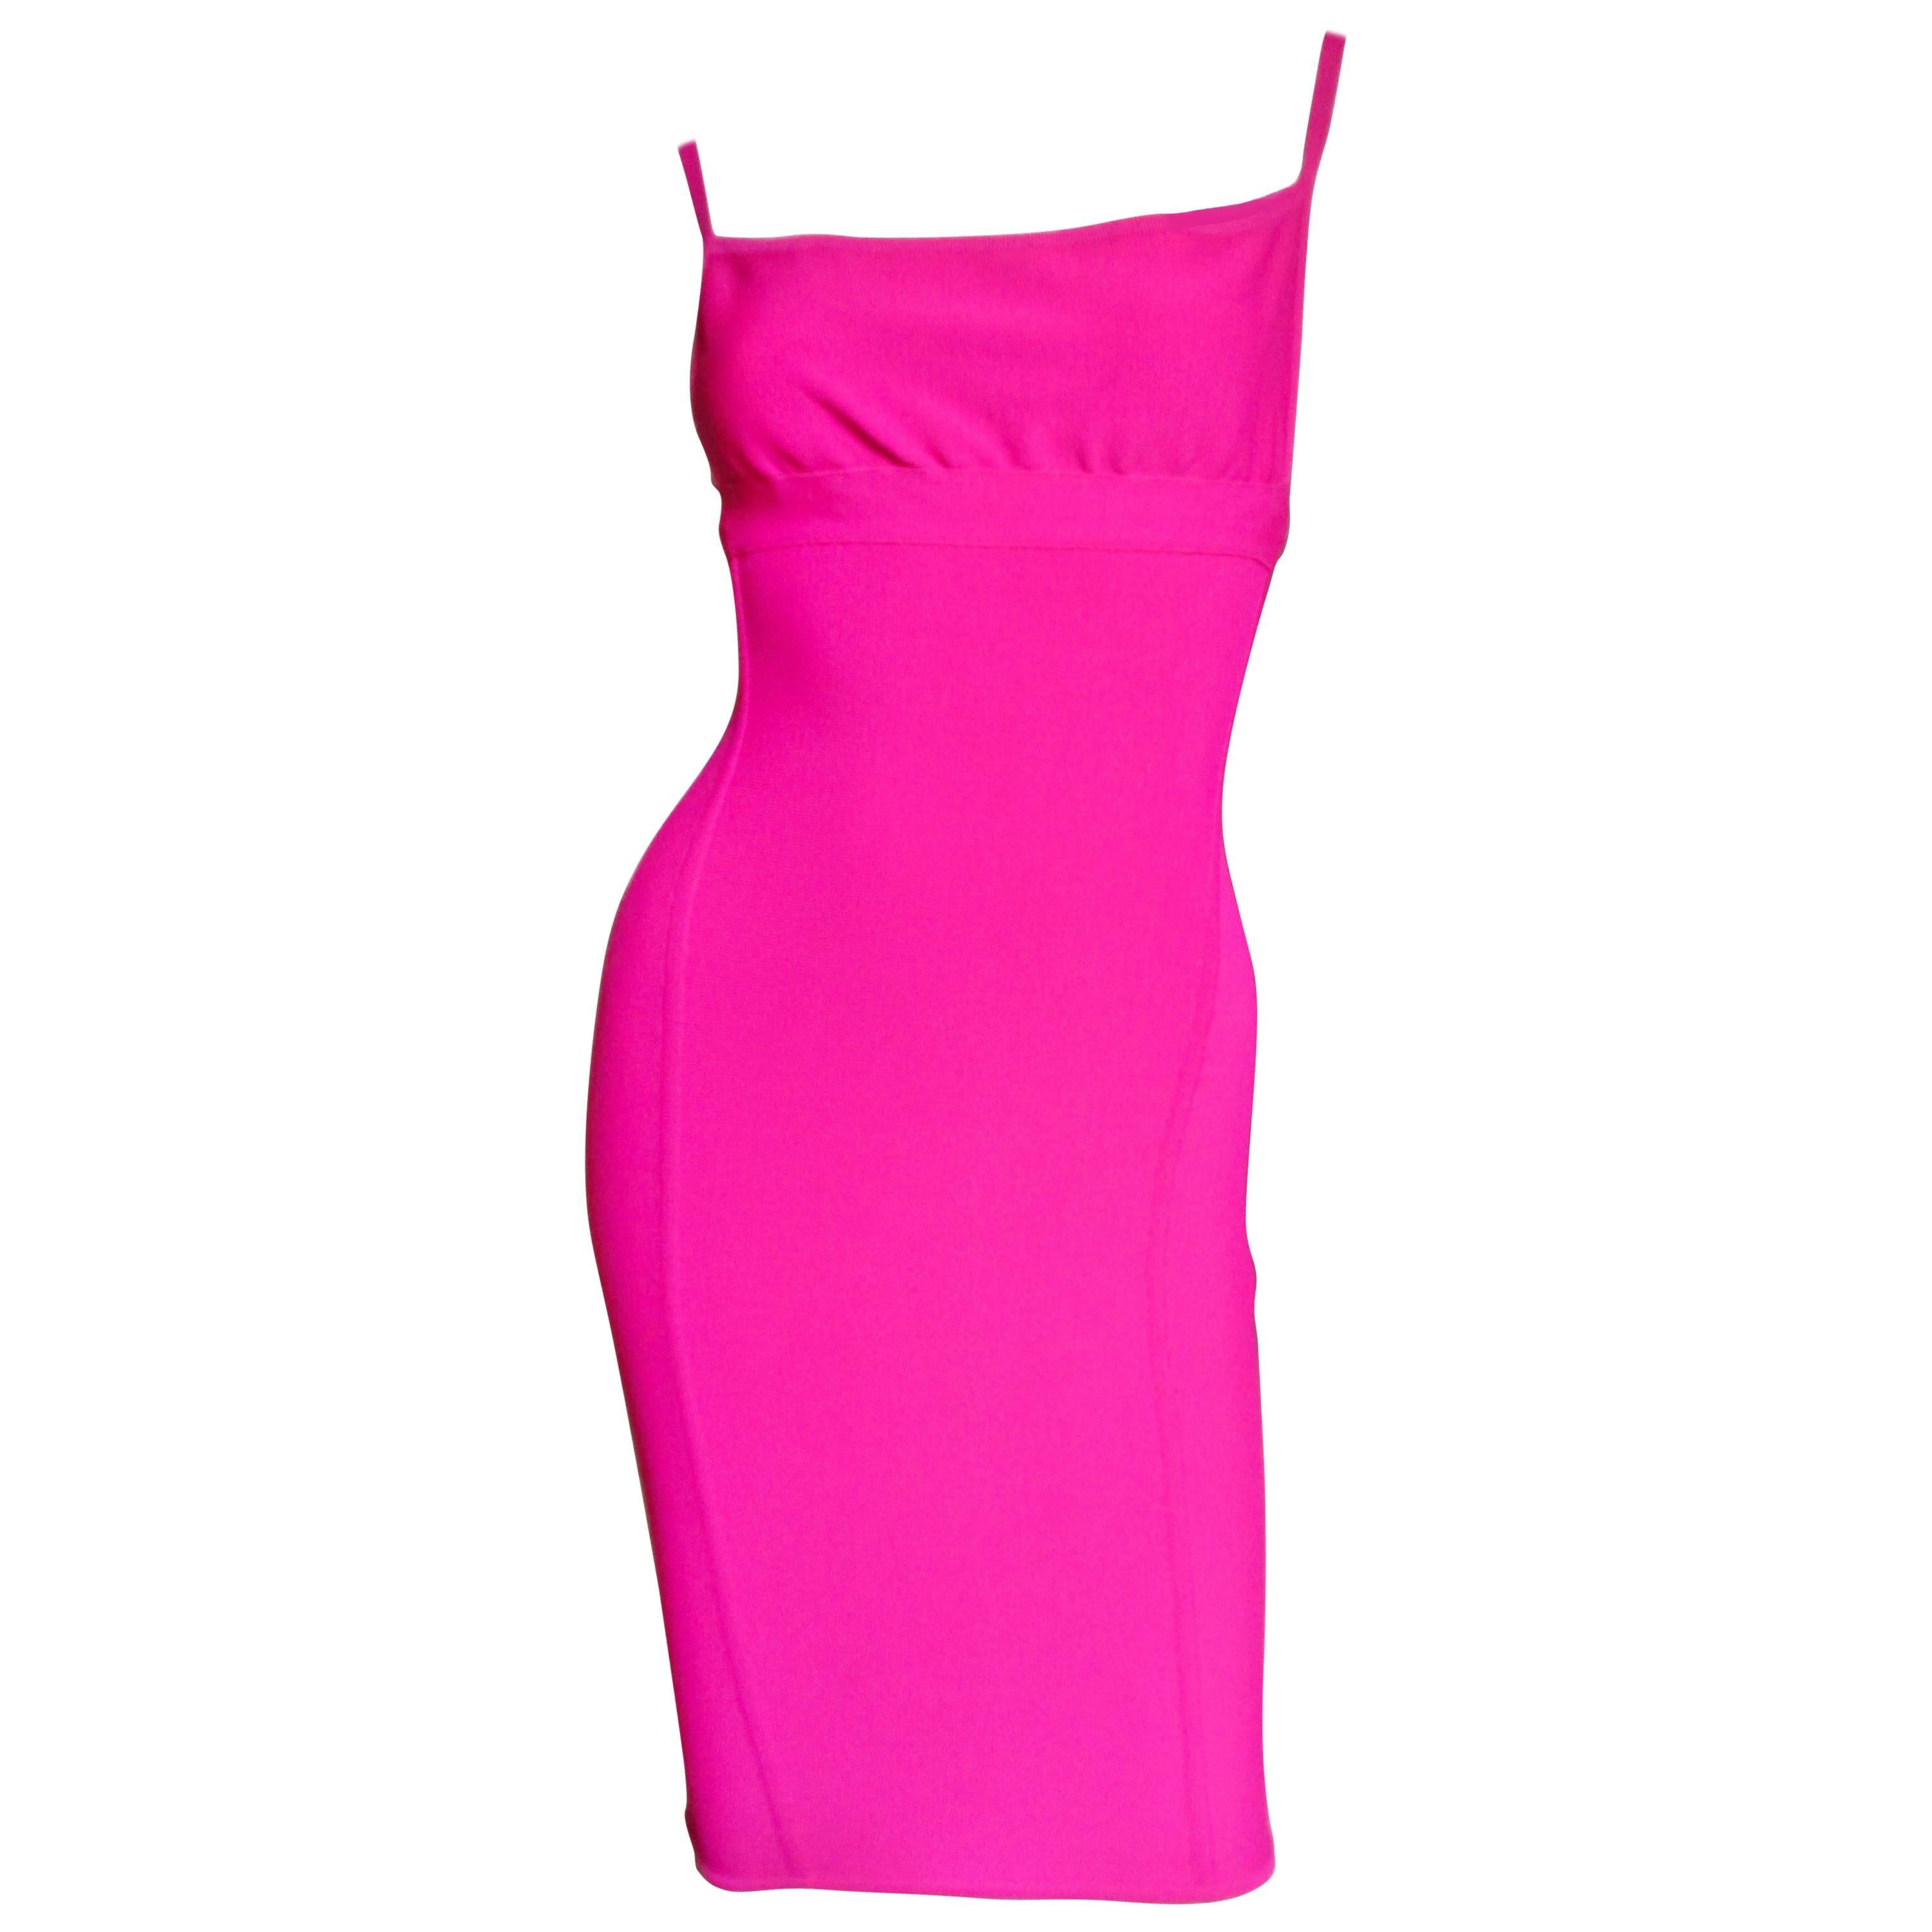 1990s Herve Leger Hot Pink Bodycon Dress